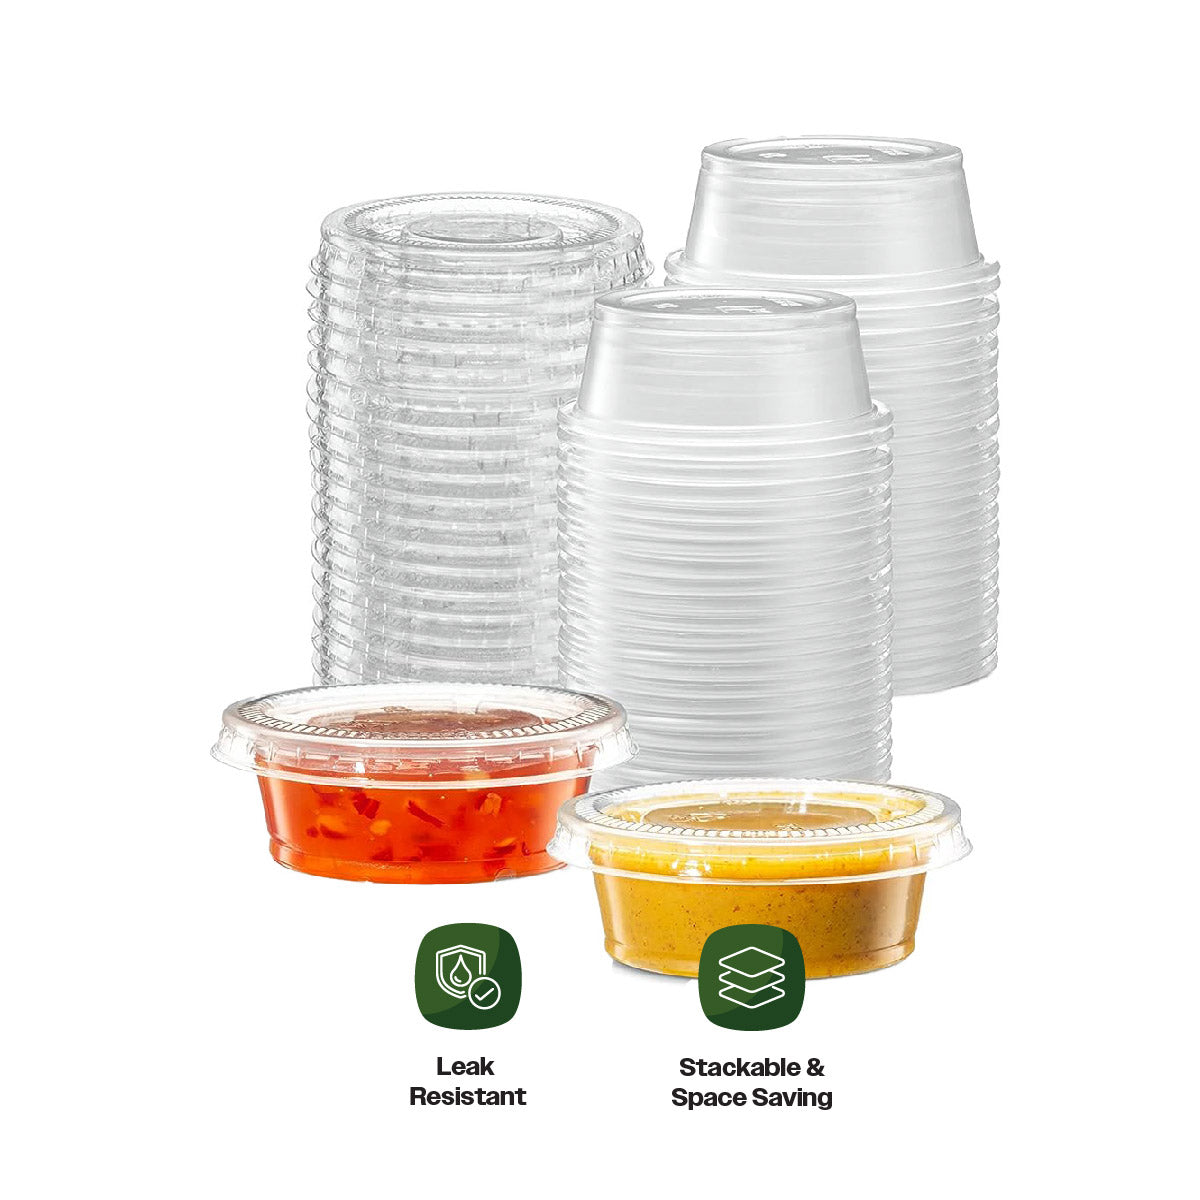 CIAO! 1.5OZ PP Clear Portion Cup (Case of 2,500)